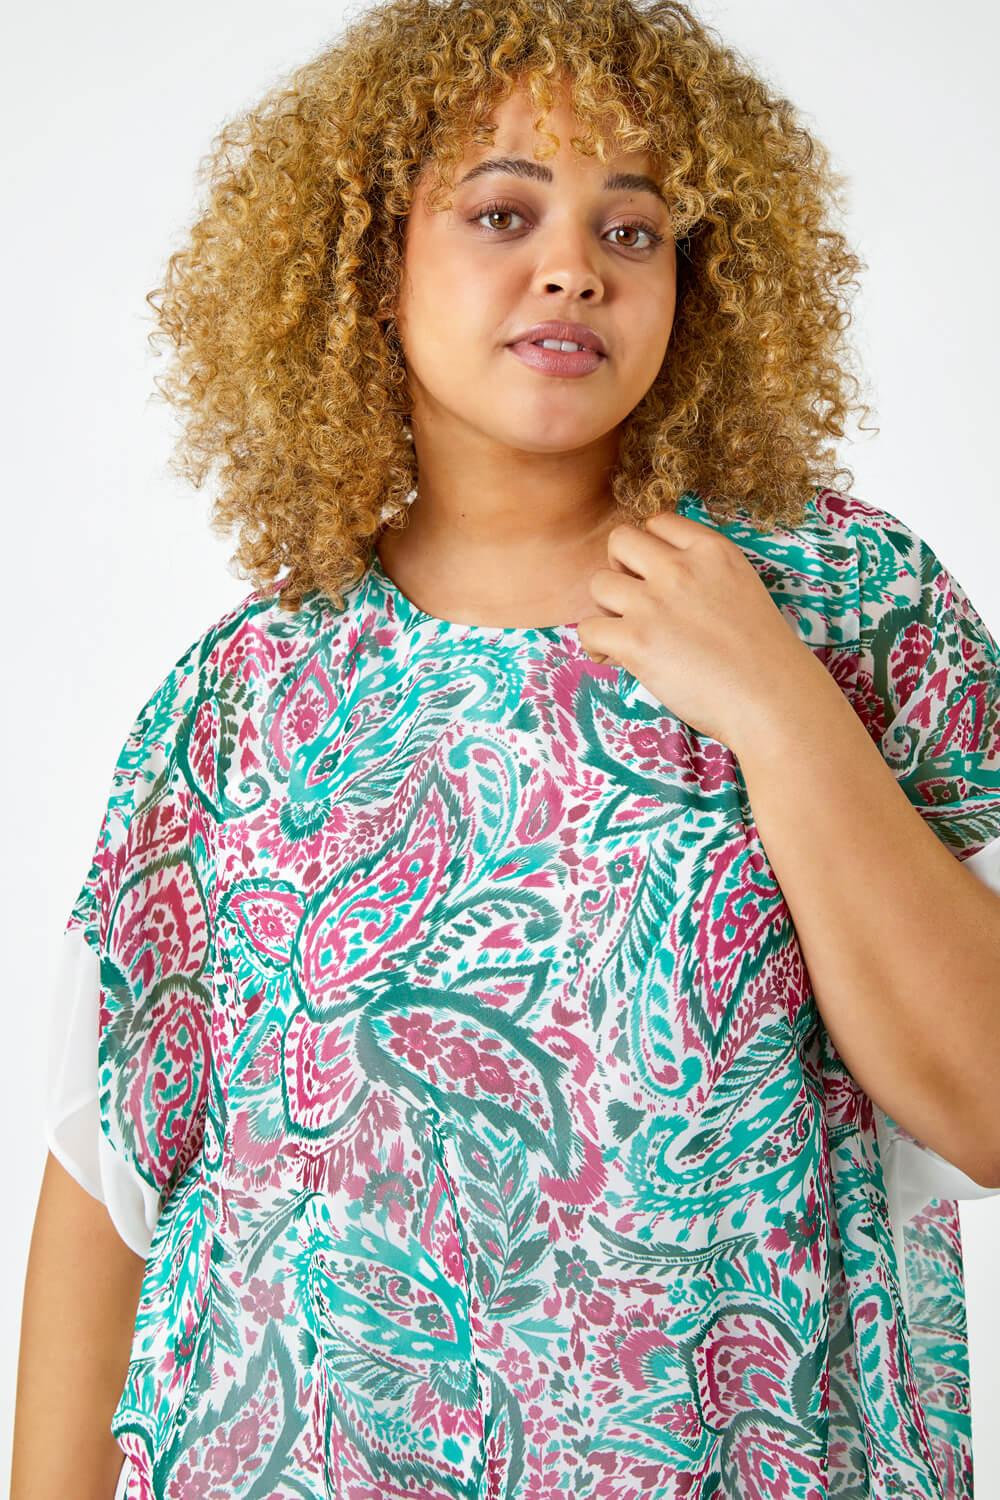 Green Curve Paisley Contrast Chiffon Top, Image 4 of 5